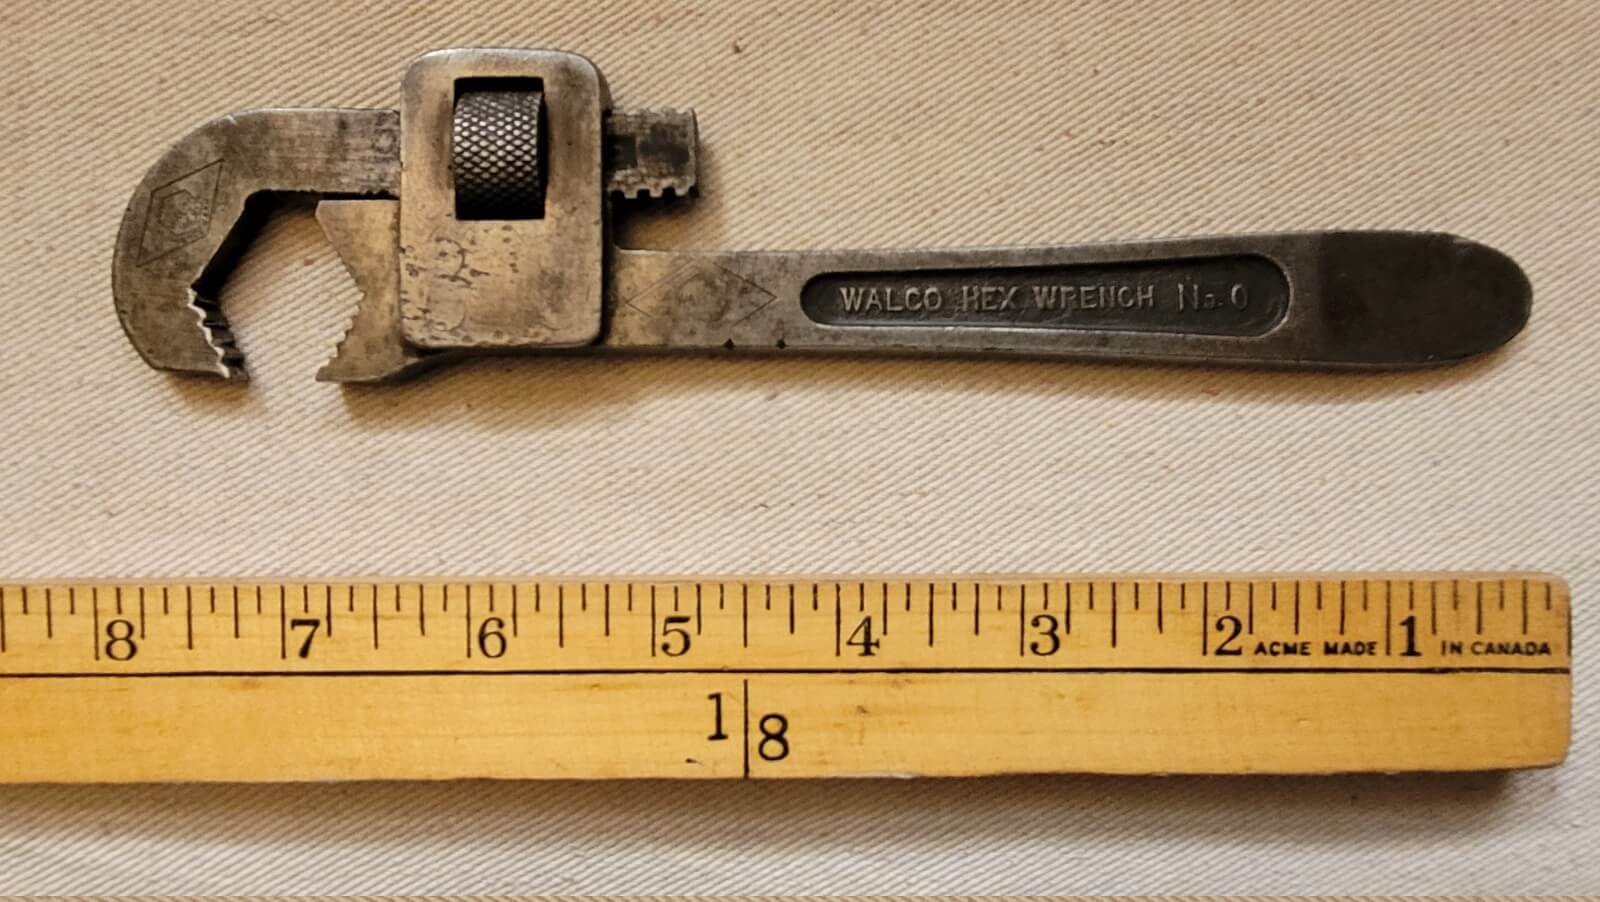 Rare Walco Hex Pie Adjustable Wrench No. 0 Walworth Mfg Co, Boston Mass - Antique and Vintage made in USA Hand Tools